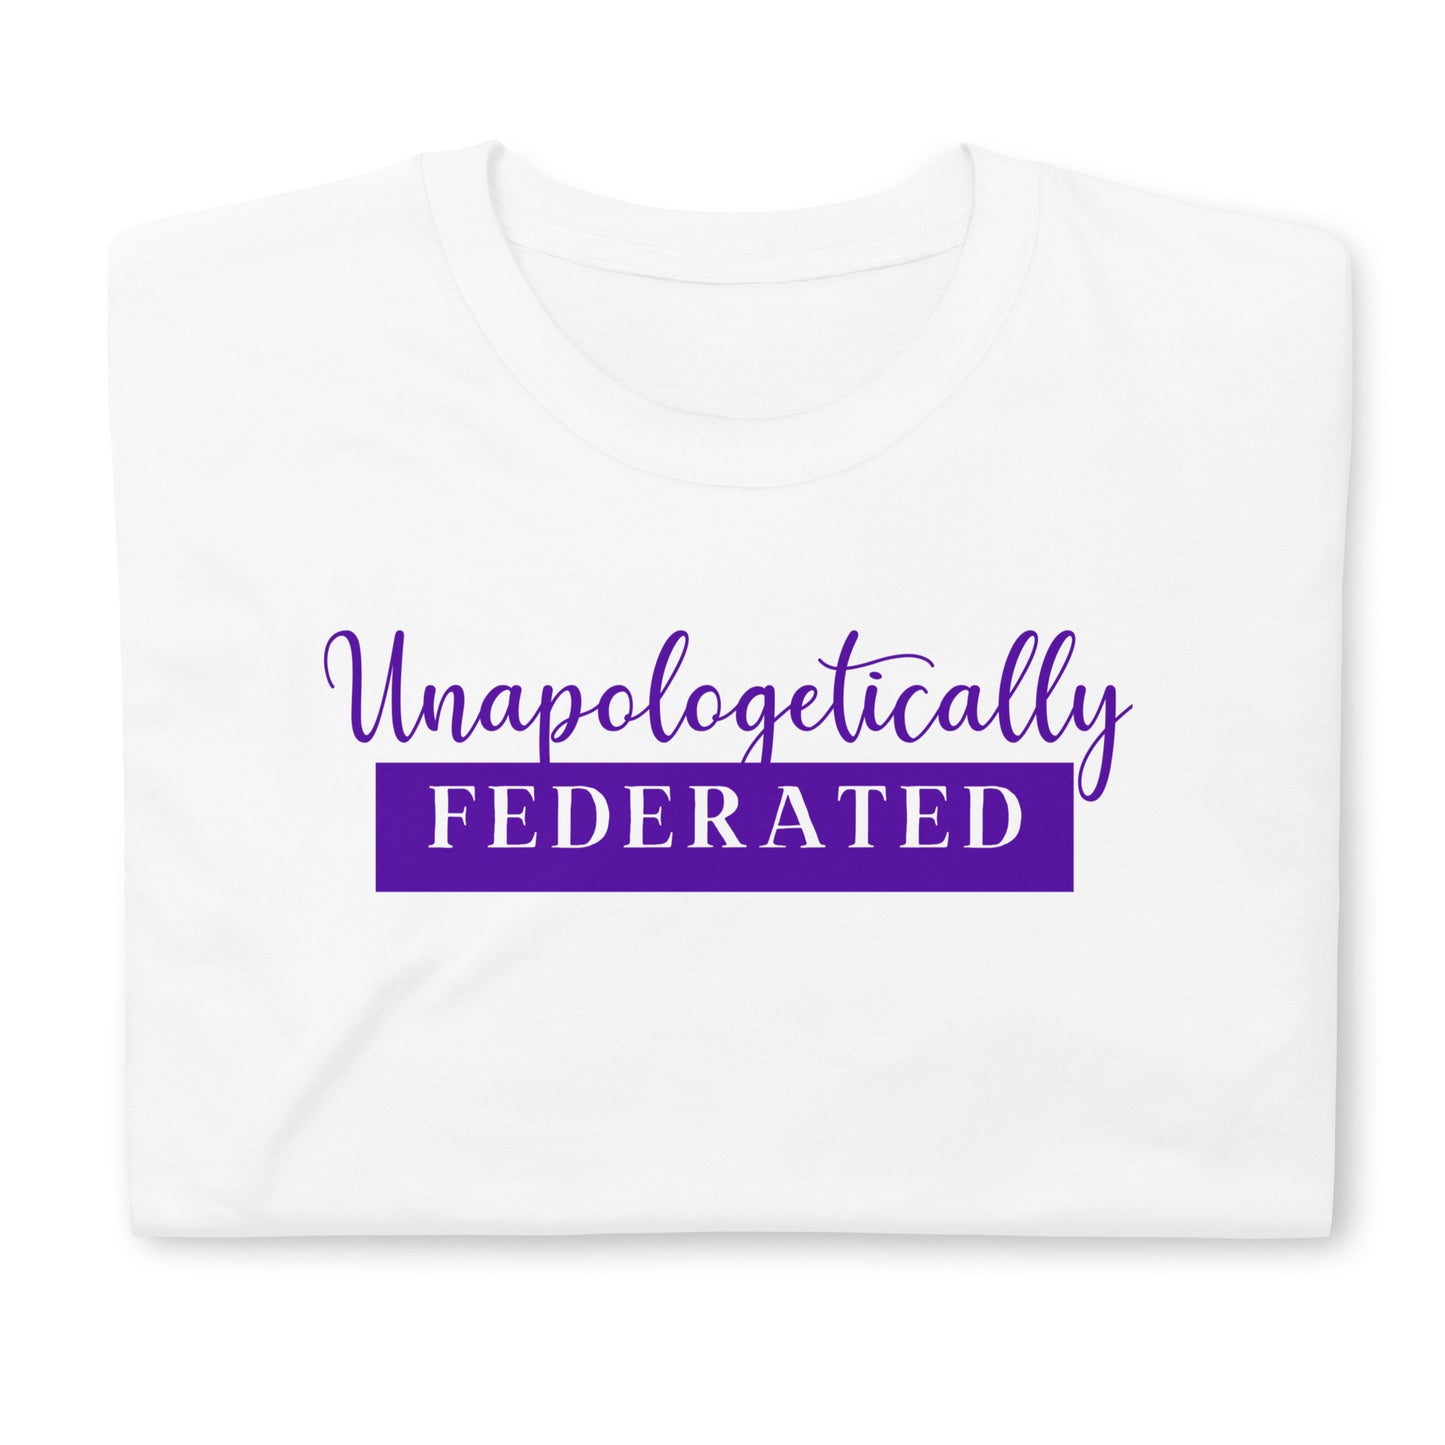 Unapologetically Federated